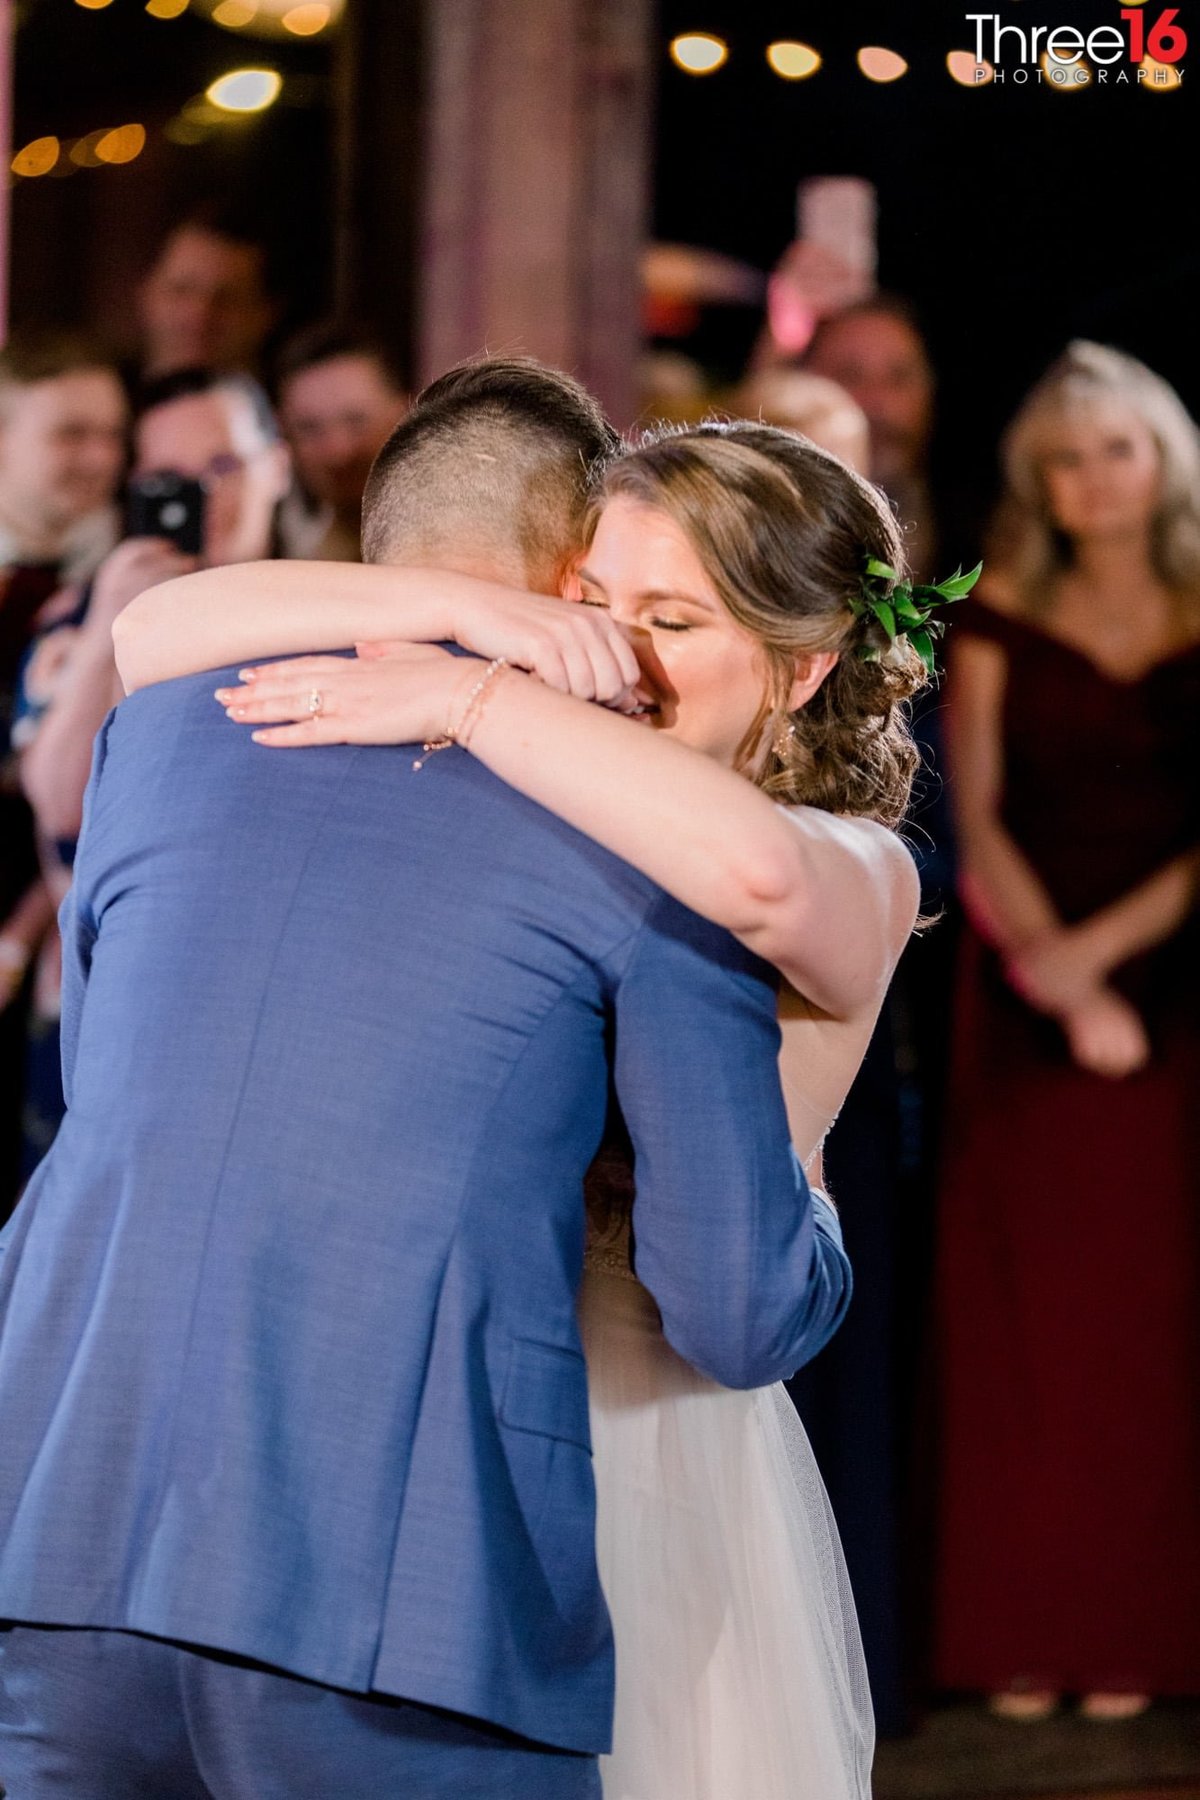 Newly married couple embrace during their first dance